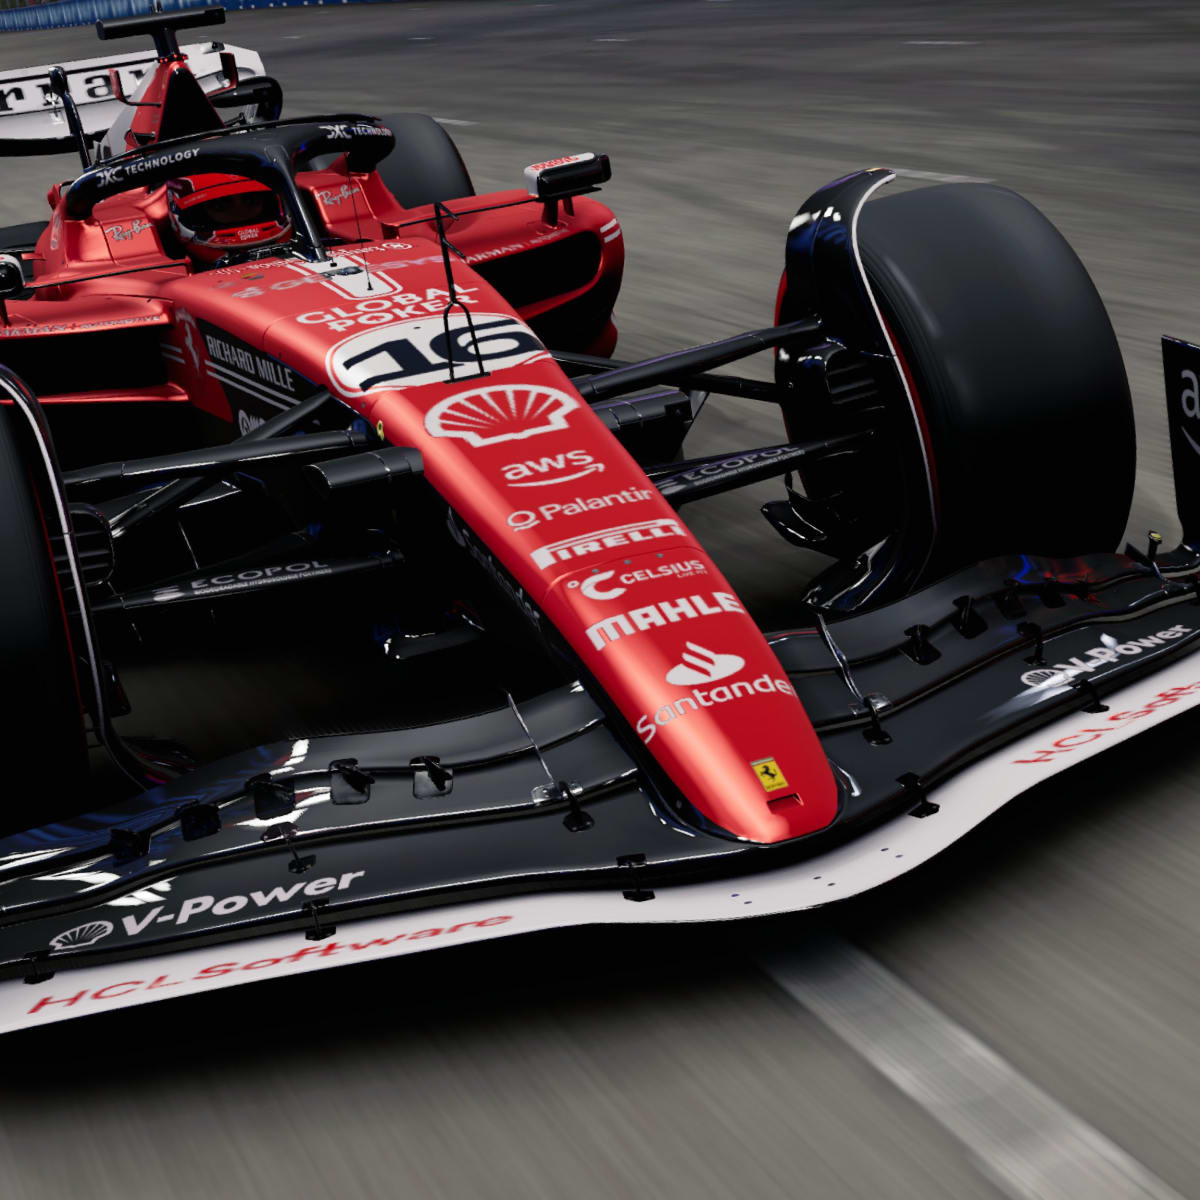 F1 News: Ferrari Pays Tribute To Its American F1 History Through a Special  Las Vegas Livery - F1 Briefings: Formula 1 News, Rumors, Standings and More